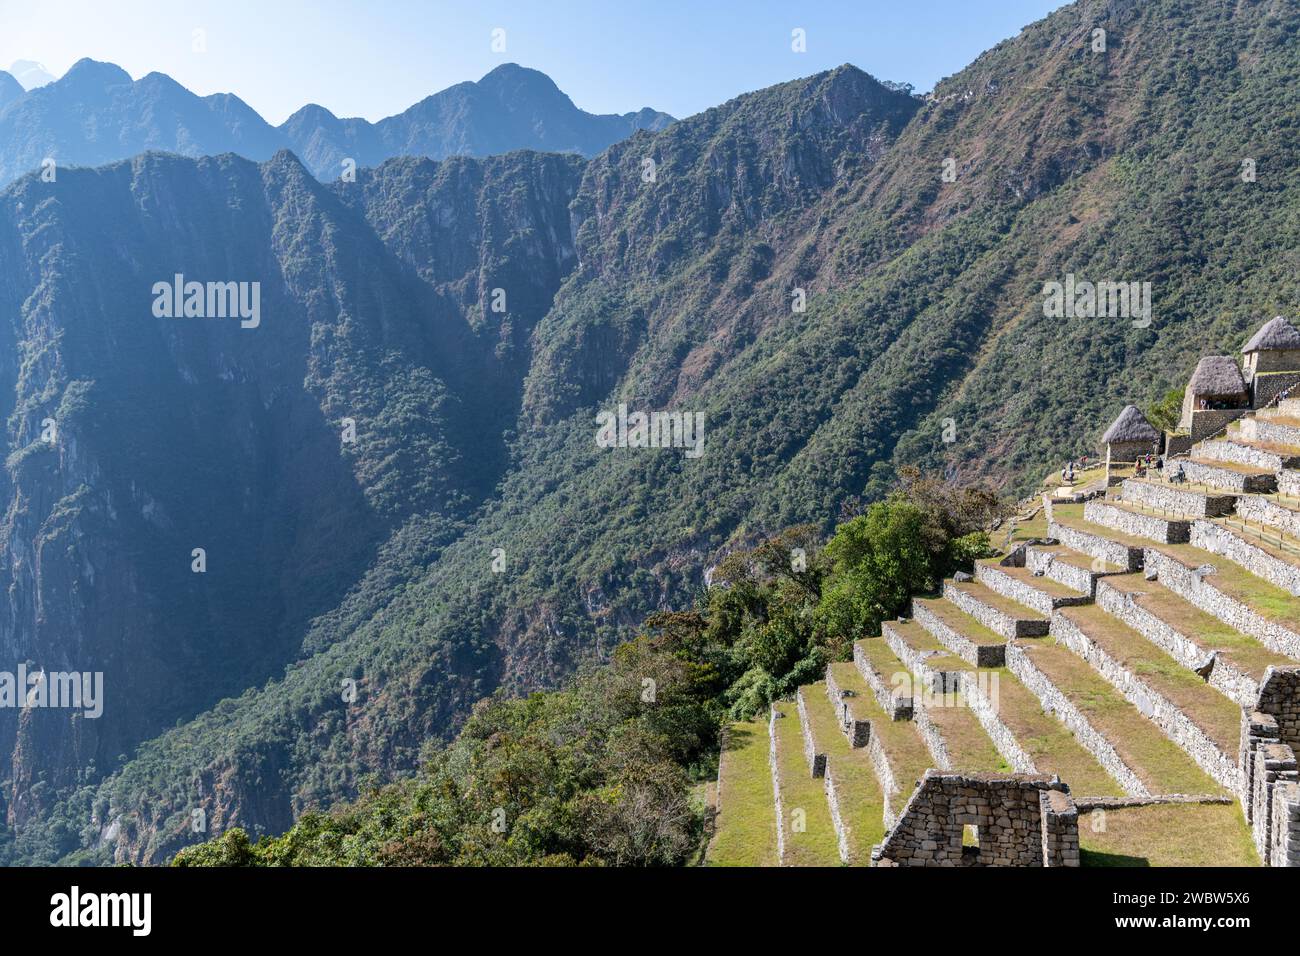 A view of the Machu Picchu citadel ruins and the mountains of the Sacred Valley in Peru Stock Photo